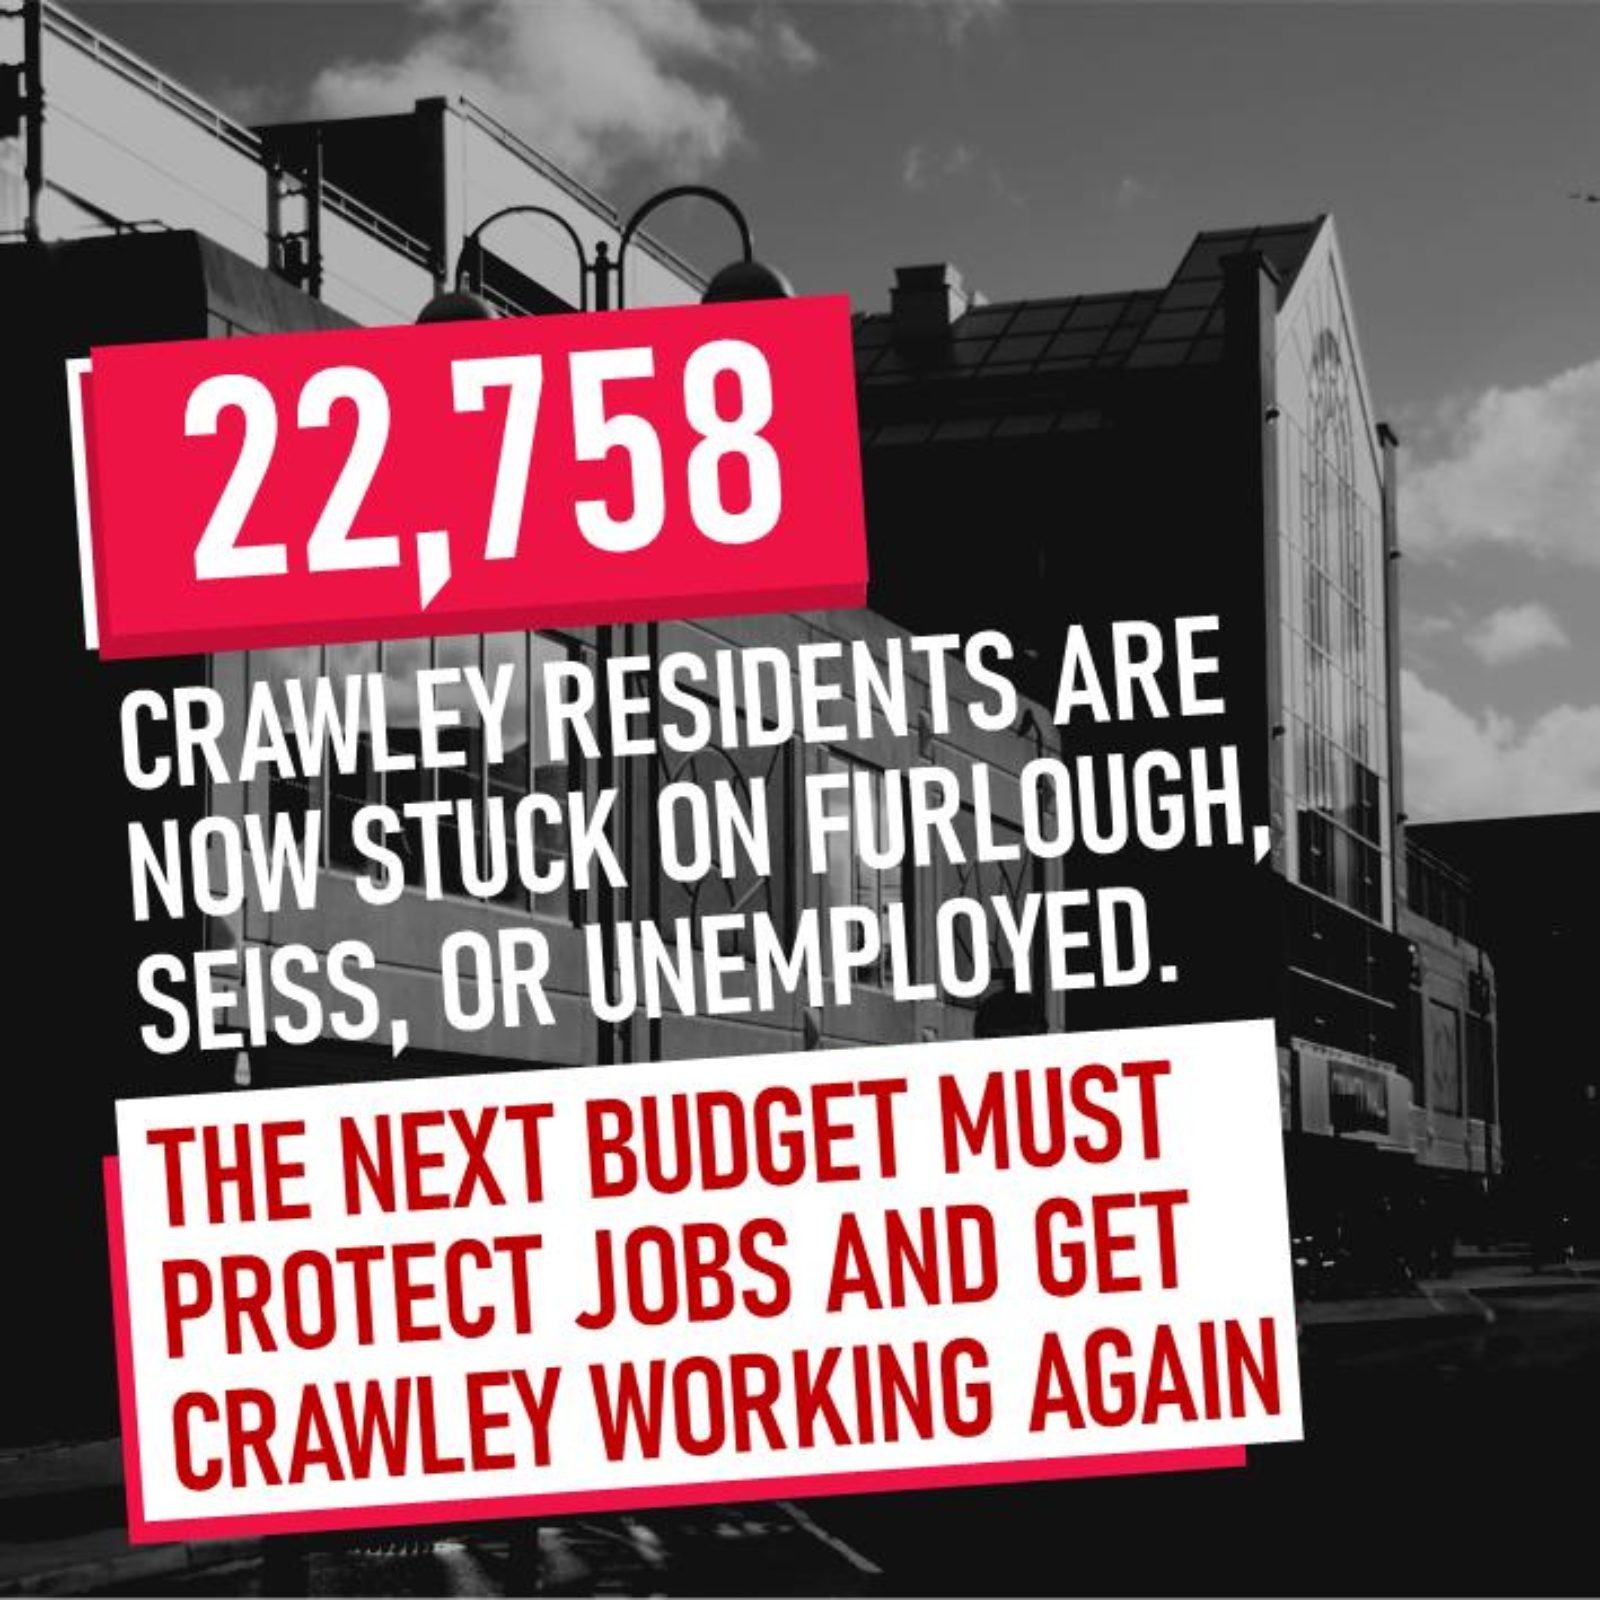 22,758 residents not working